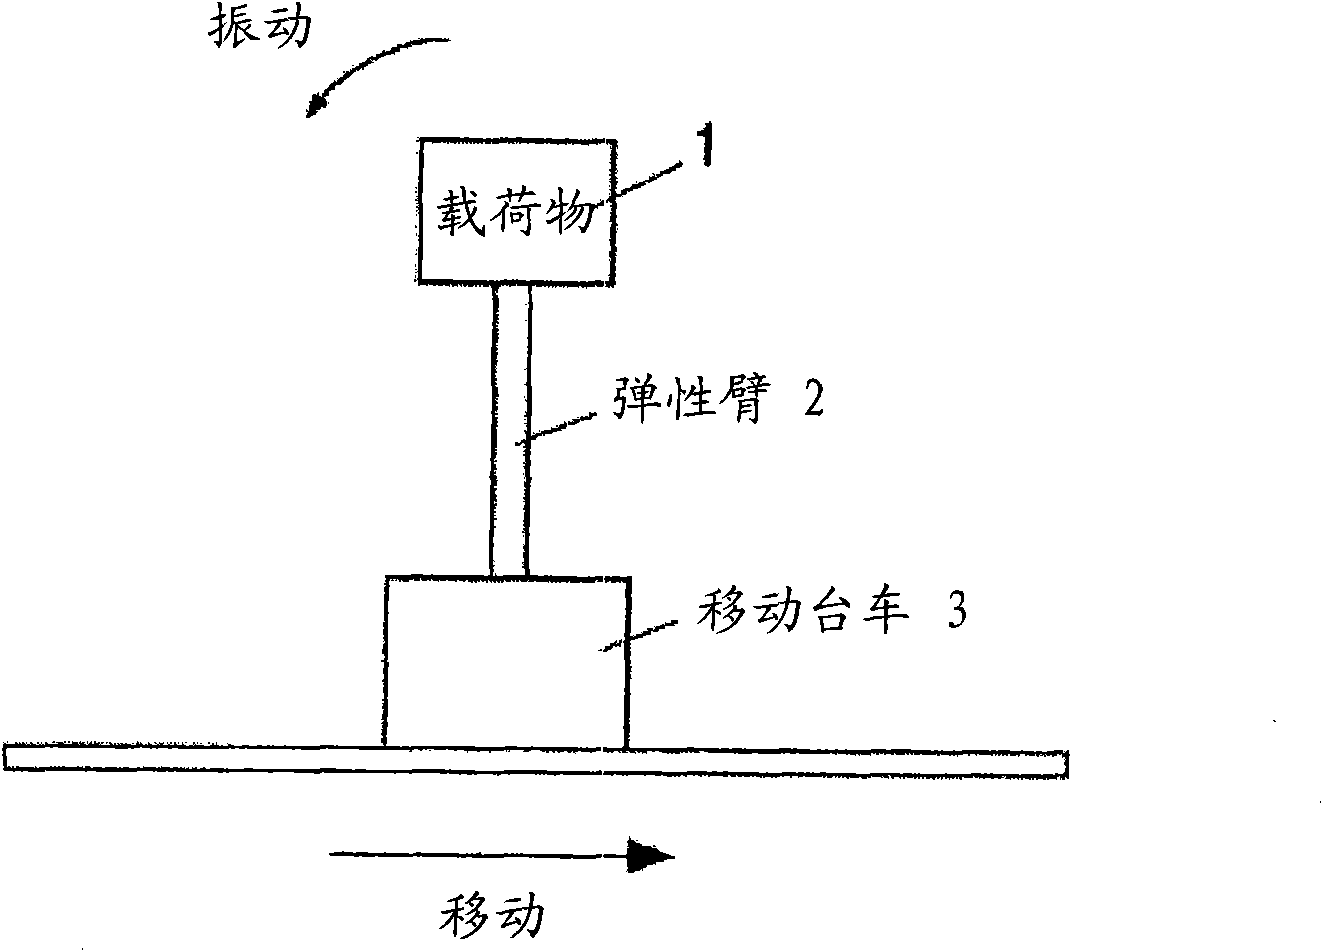 Position control method for vibration attenuation and apparatus thereof